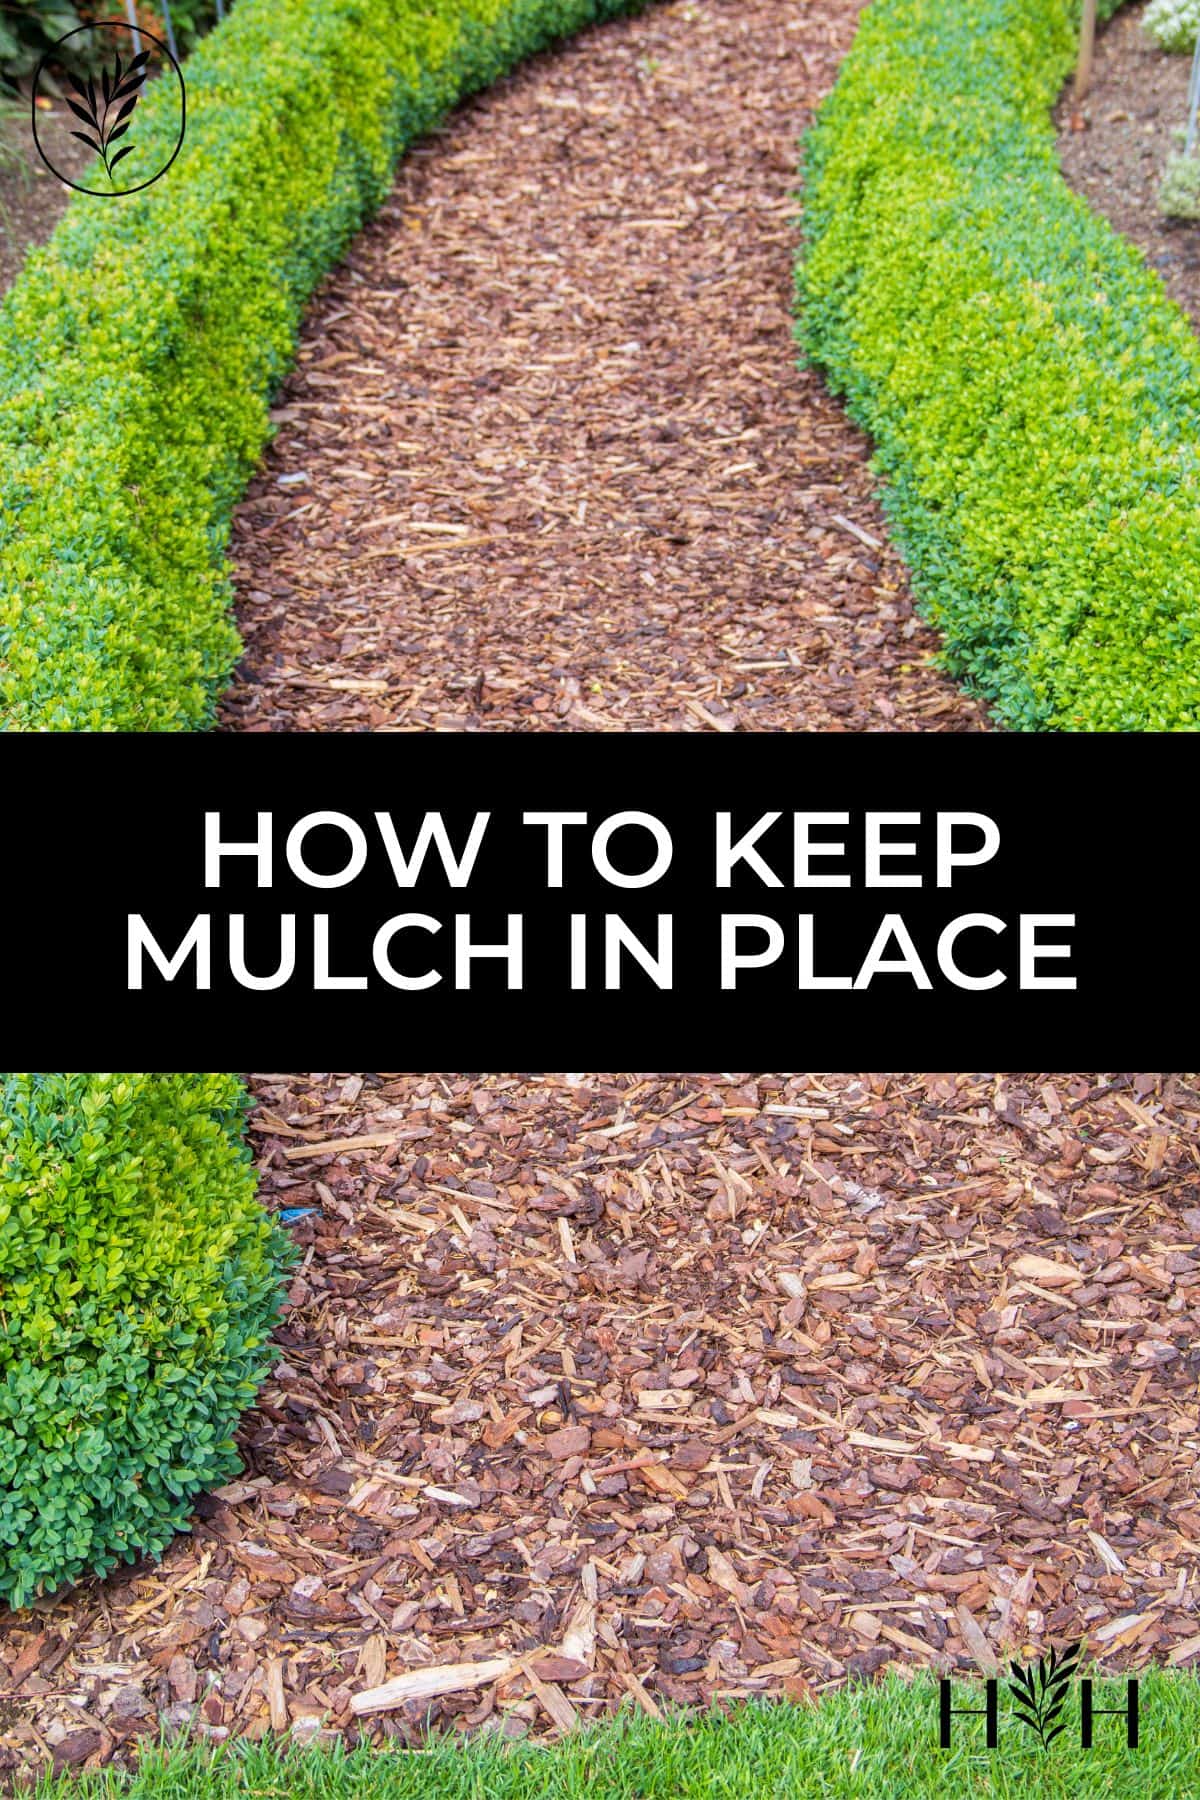 How to keep mulch in place via @home4theharvest